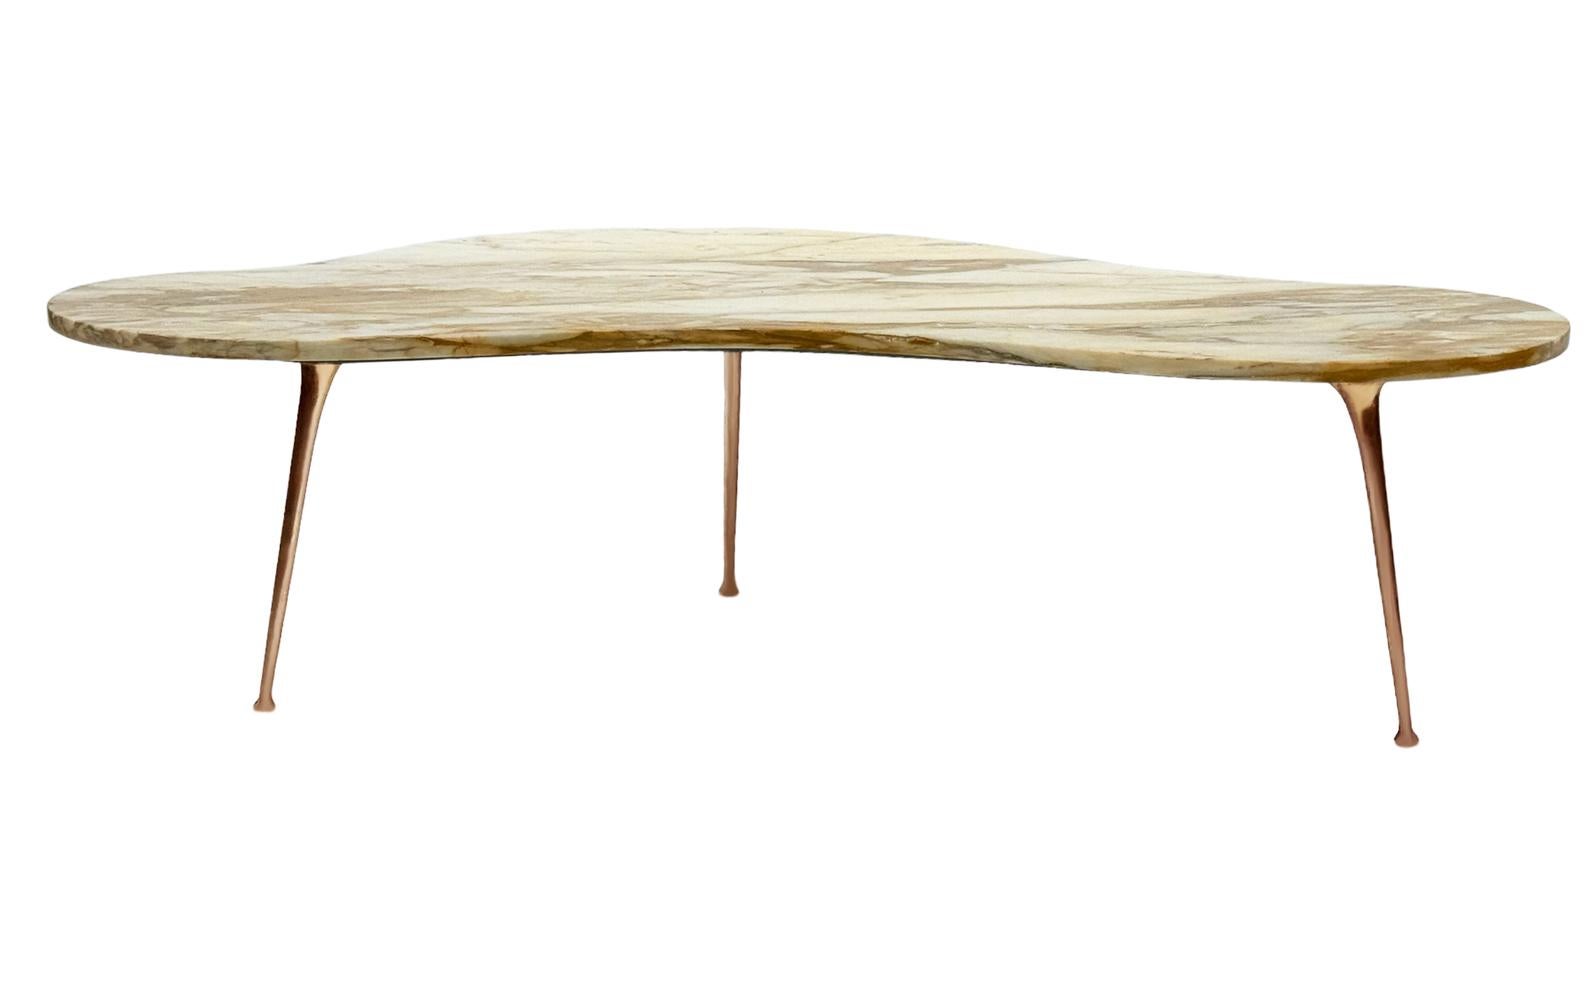 A stunning Italian coffee table from Italy circa 1960's. It features an irregular free-form  kidney shape top in beige marble, with sexy brass stiletto legs.